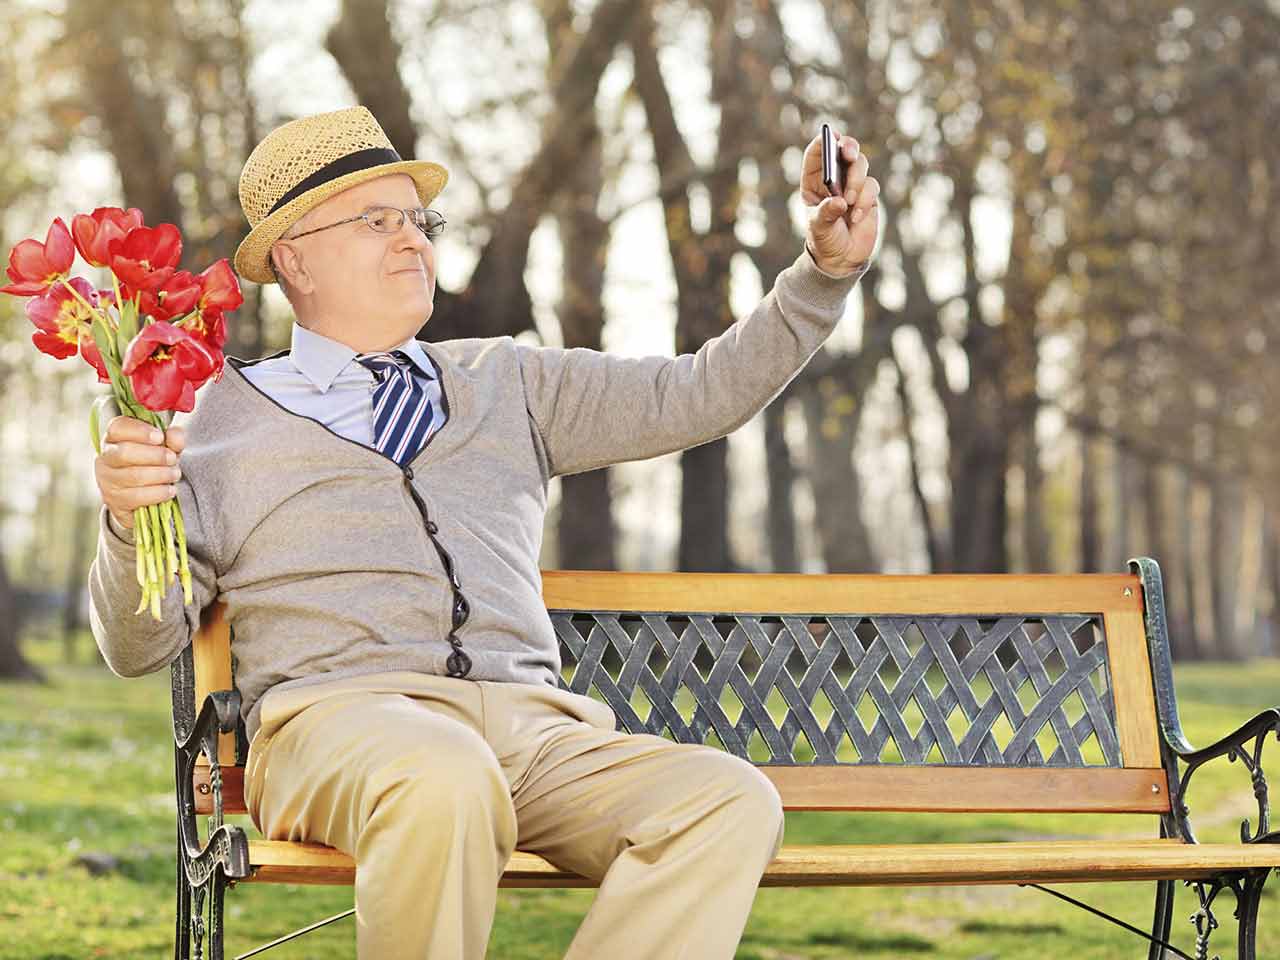 Senior gentleman sitting on bench with flowers wiating for a date 